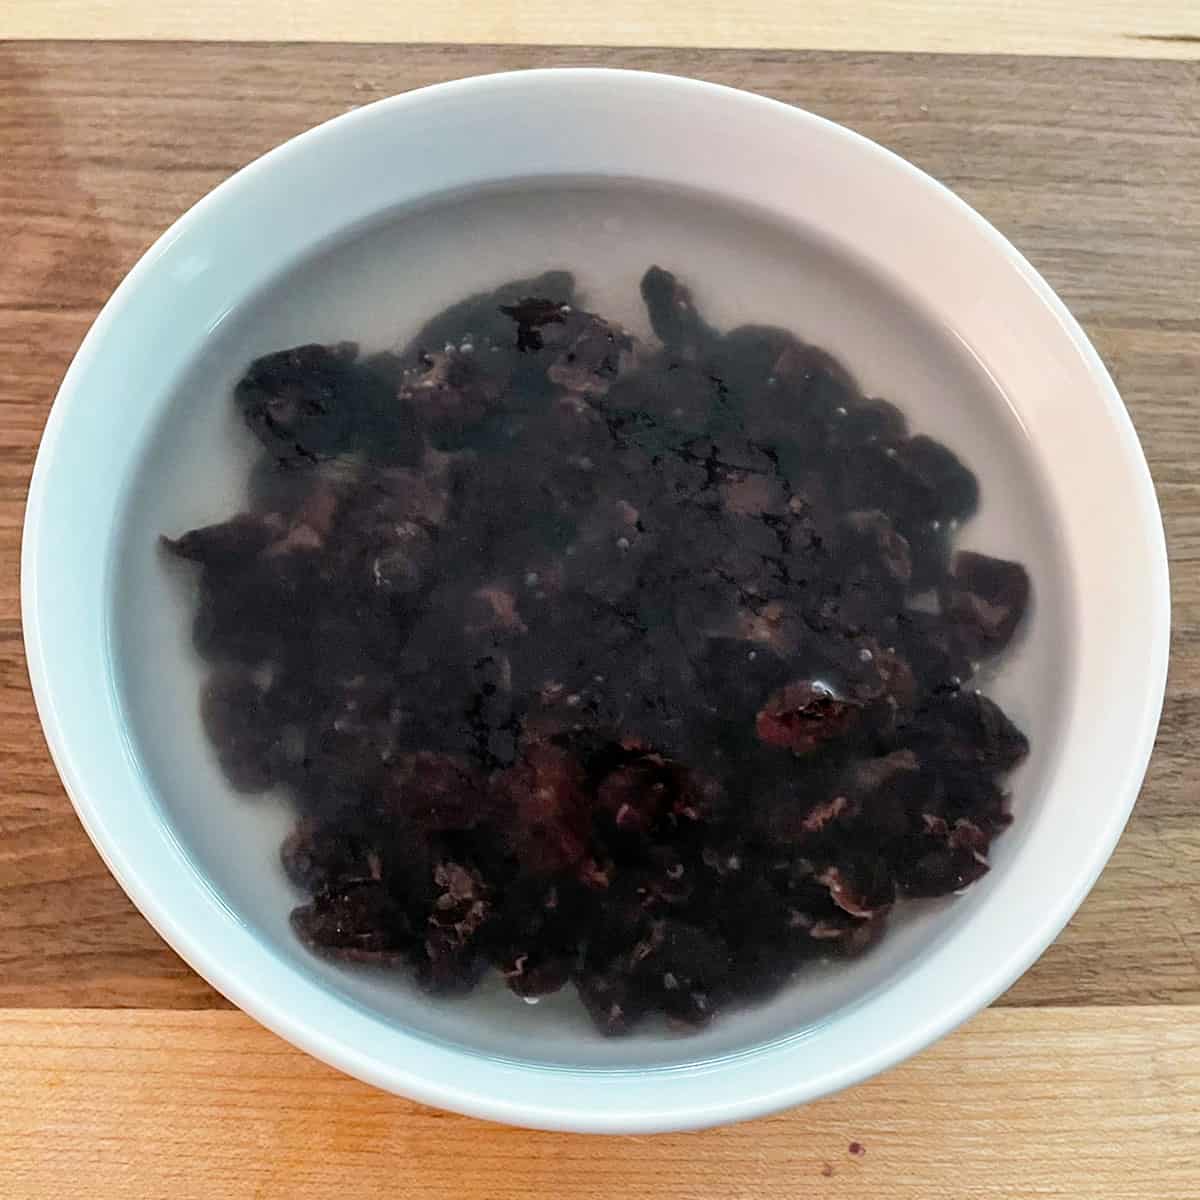 Dried cherries soaking in a white bowl of water and Amoretti.